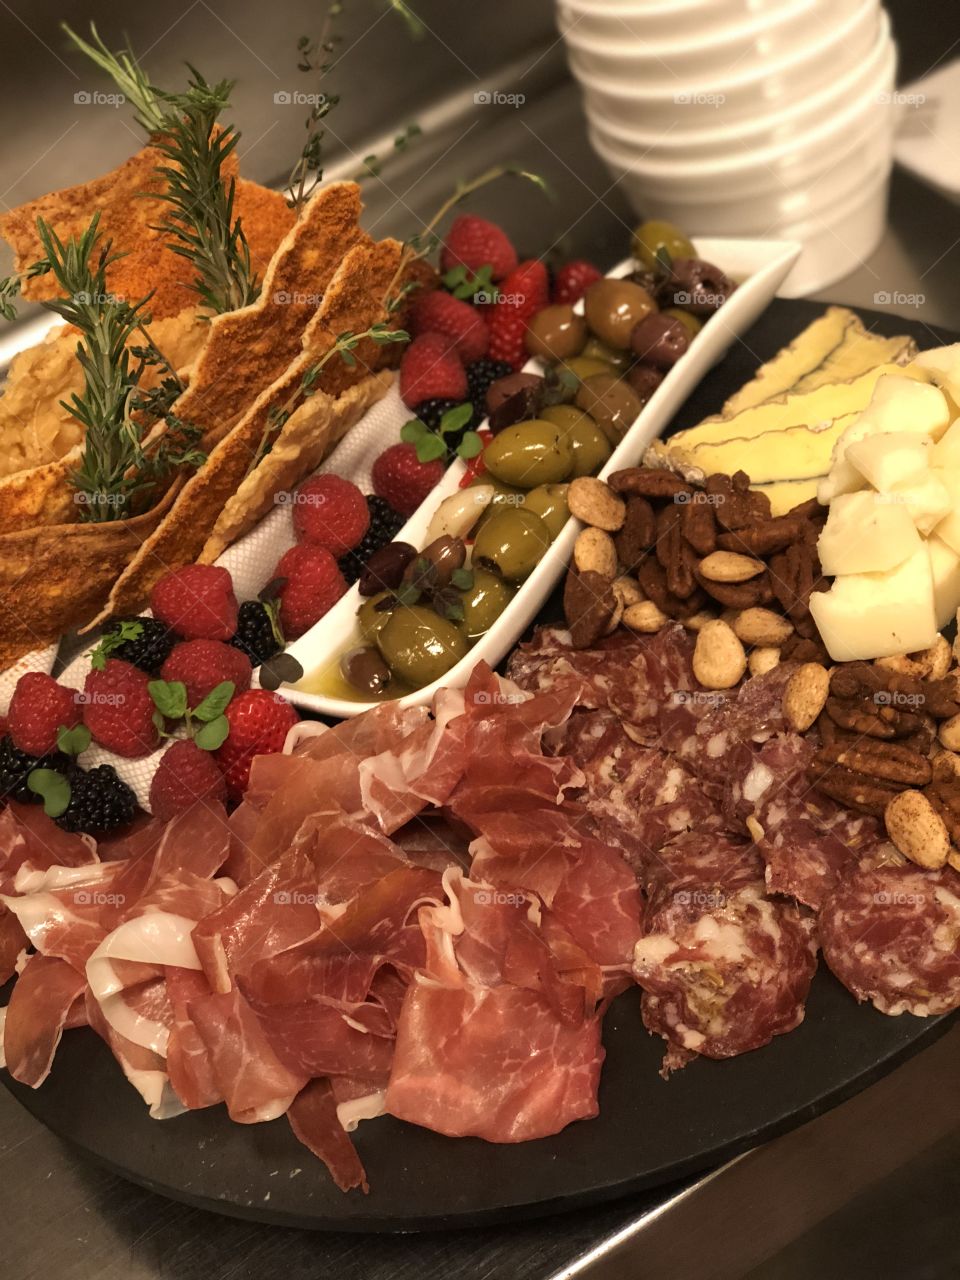 Meat & Cheese platter